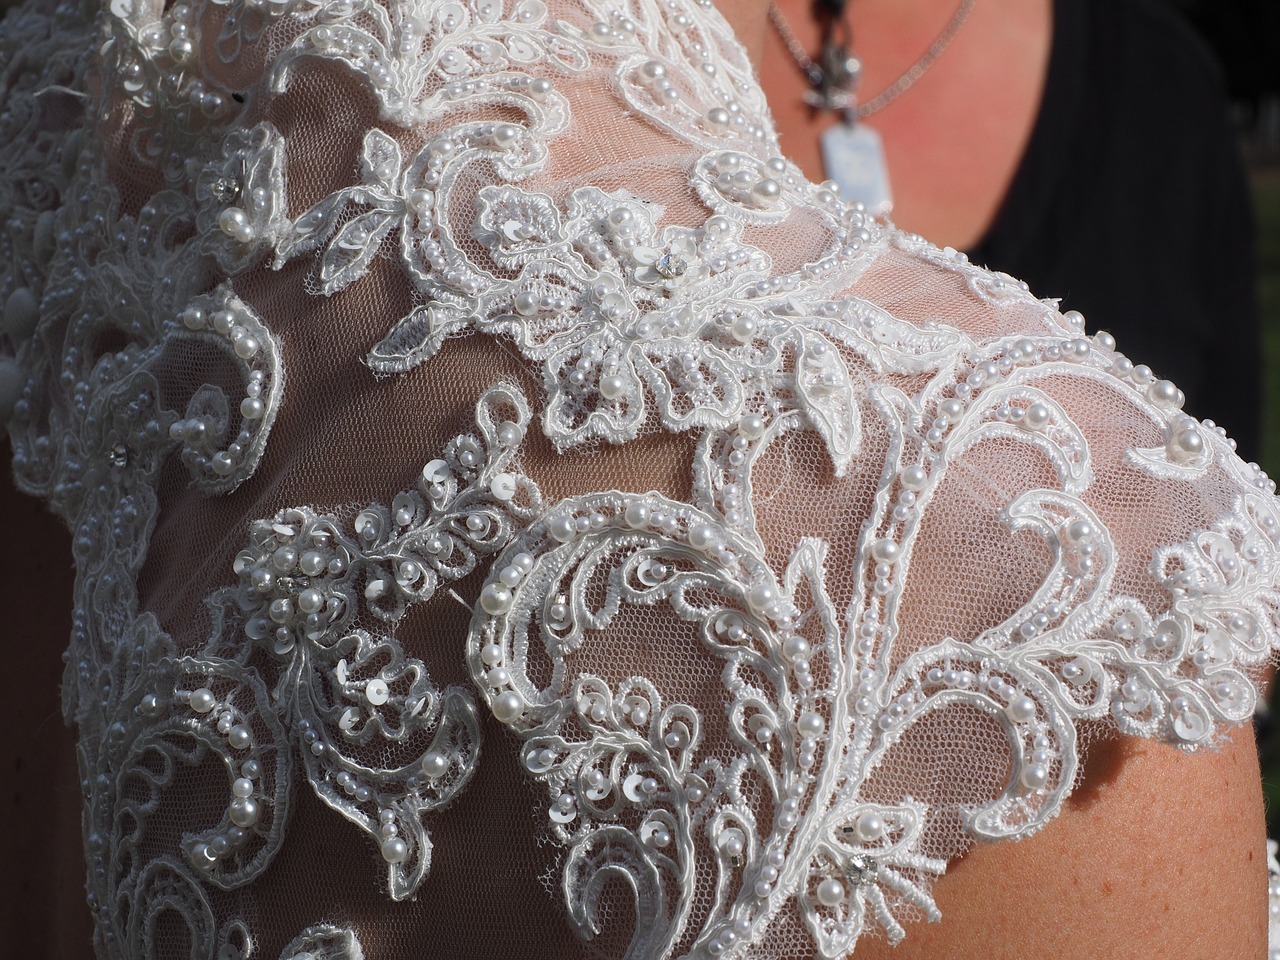 An intricately beaded lace shoulder of a bridal gown.